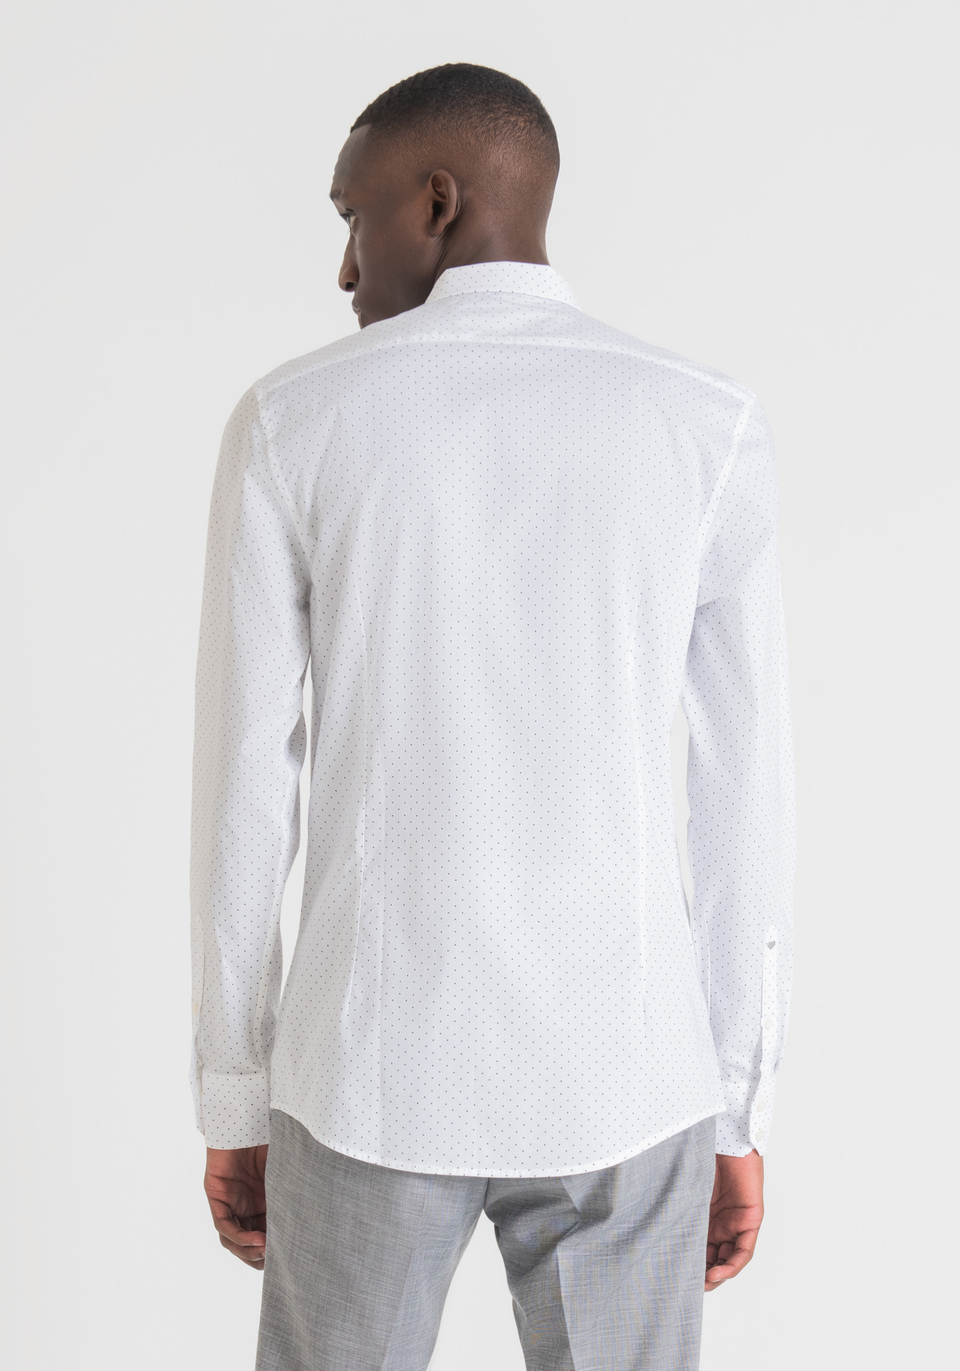 NAPOLI SLIM FIT SHIRT IN PURE SOFT TOUCH COTTON WITH ALL-OVER MICROPRINT - Antony Morato Online Shop